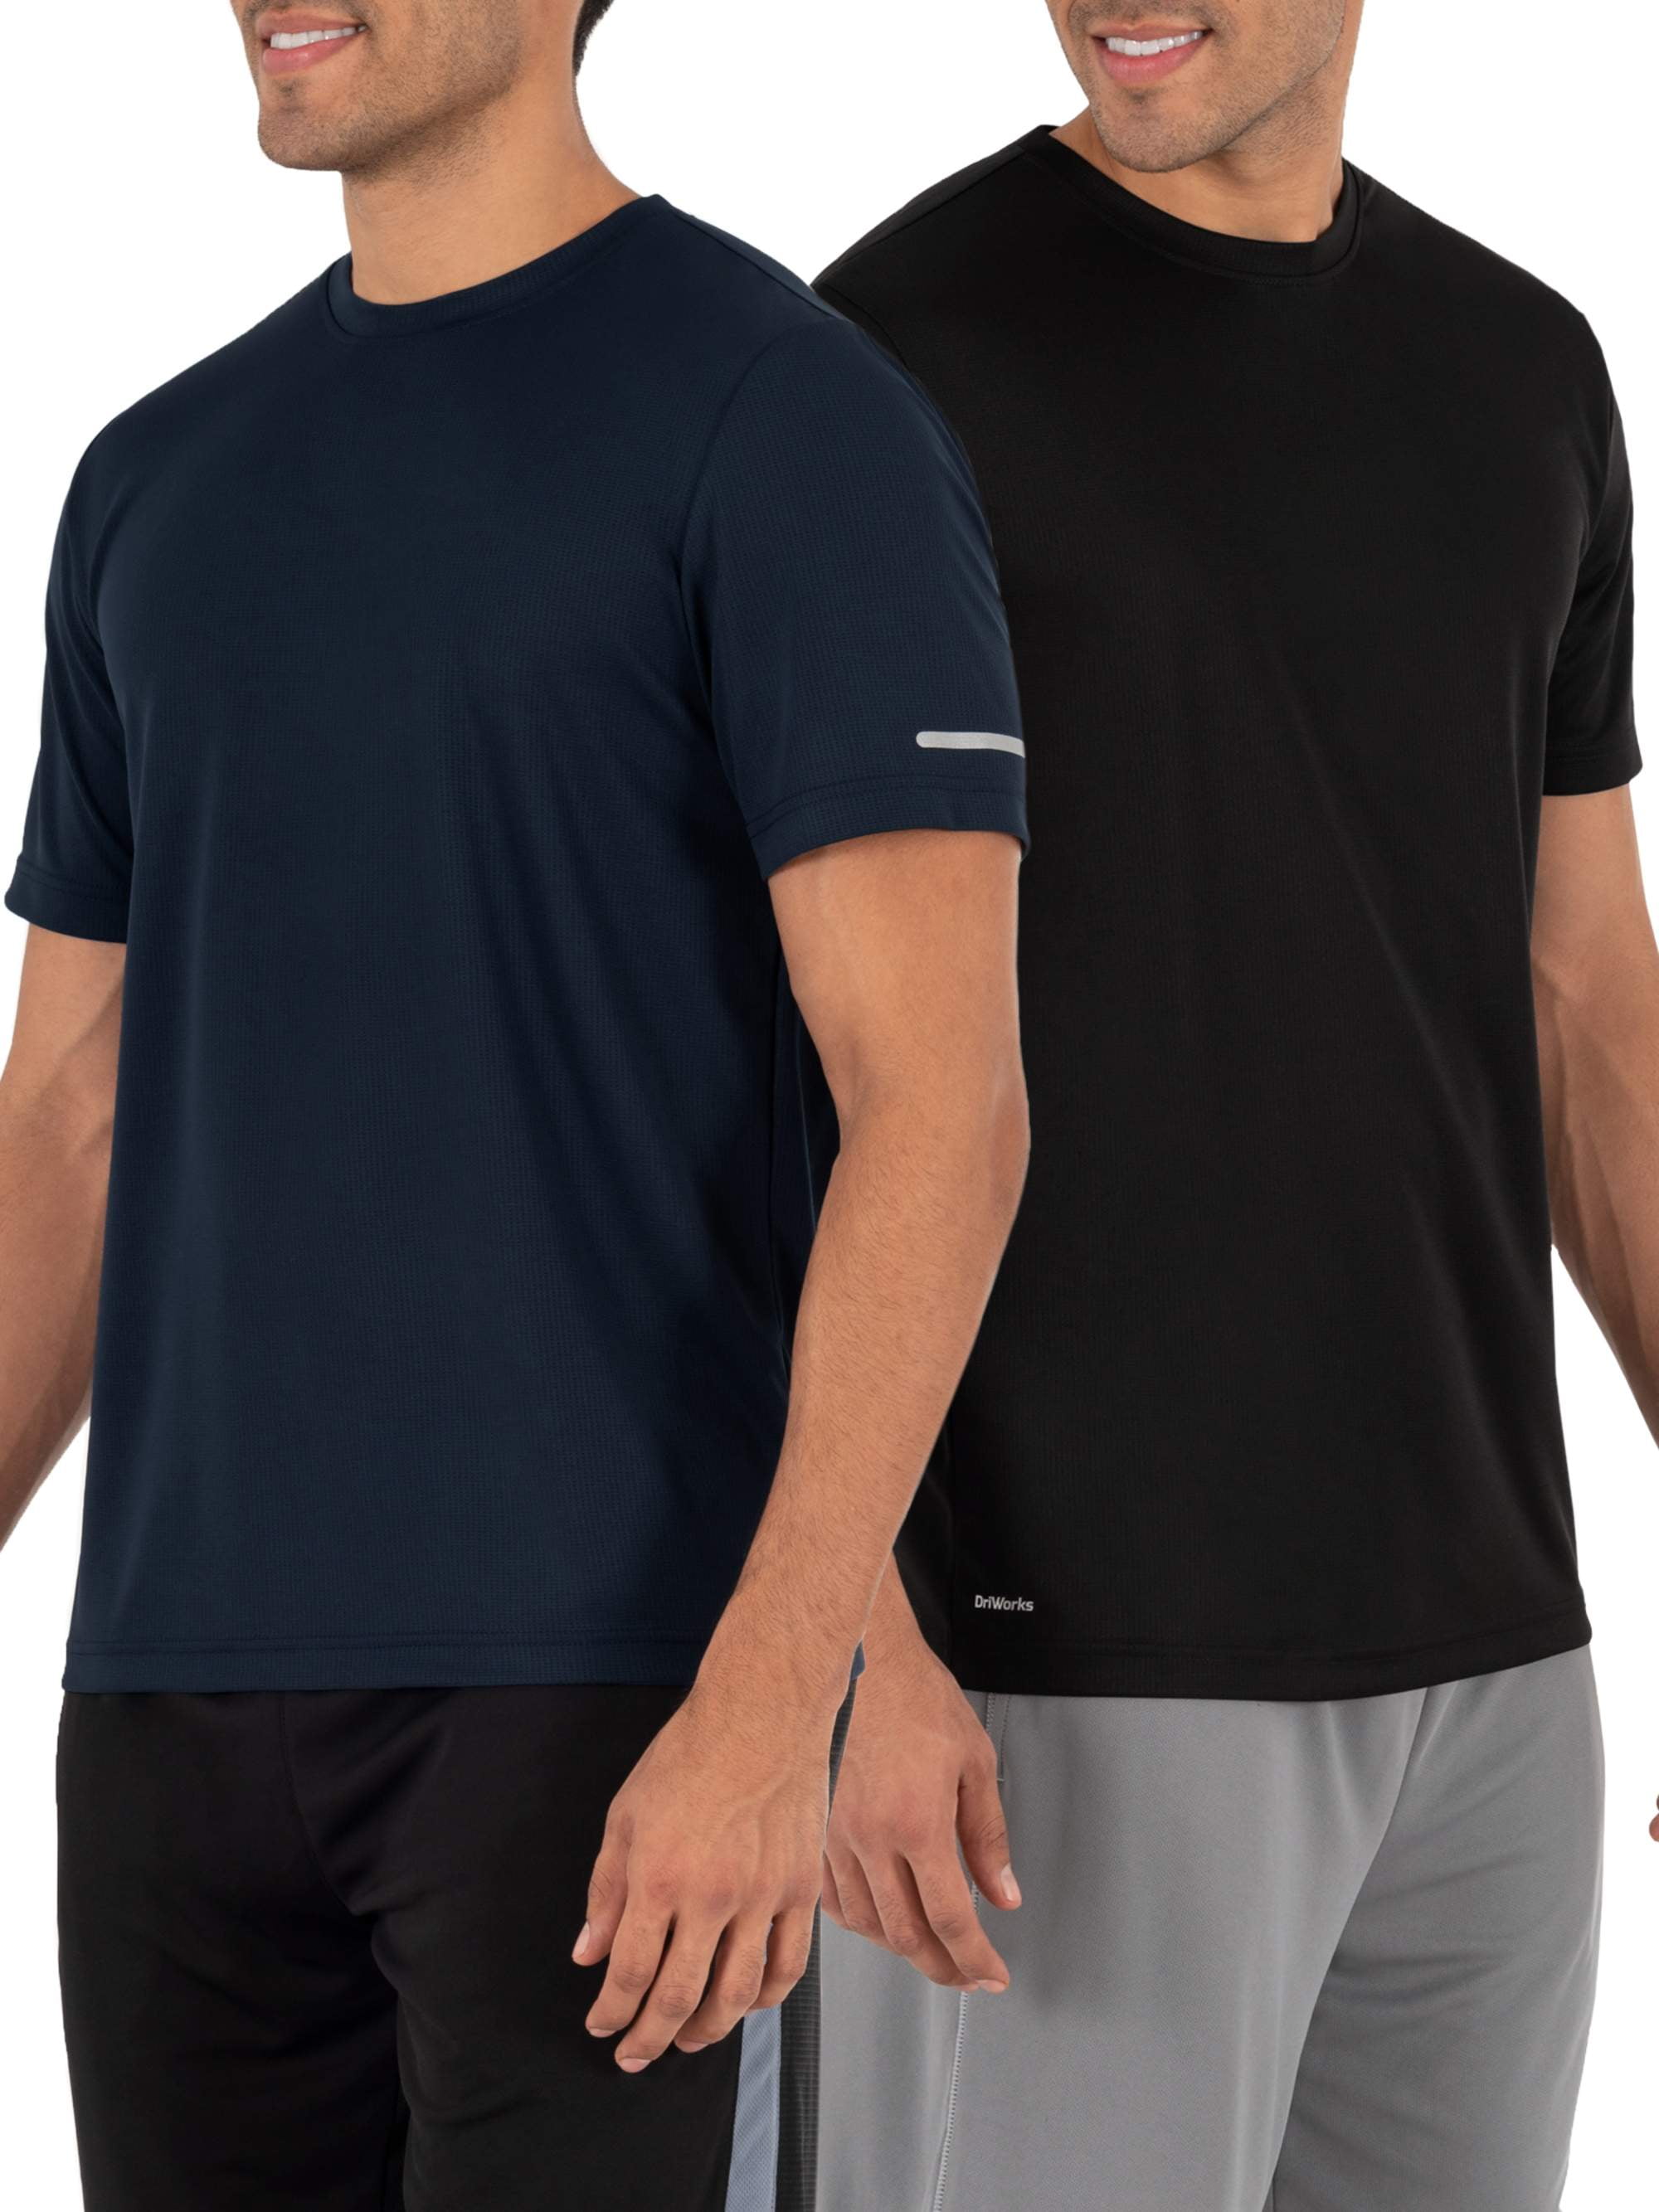 Athletic Works Men's Performance Core Quick Dry Short Sleeve Crew T ...